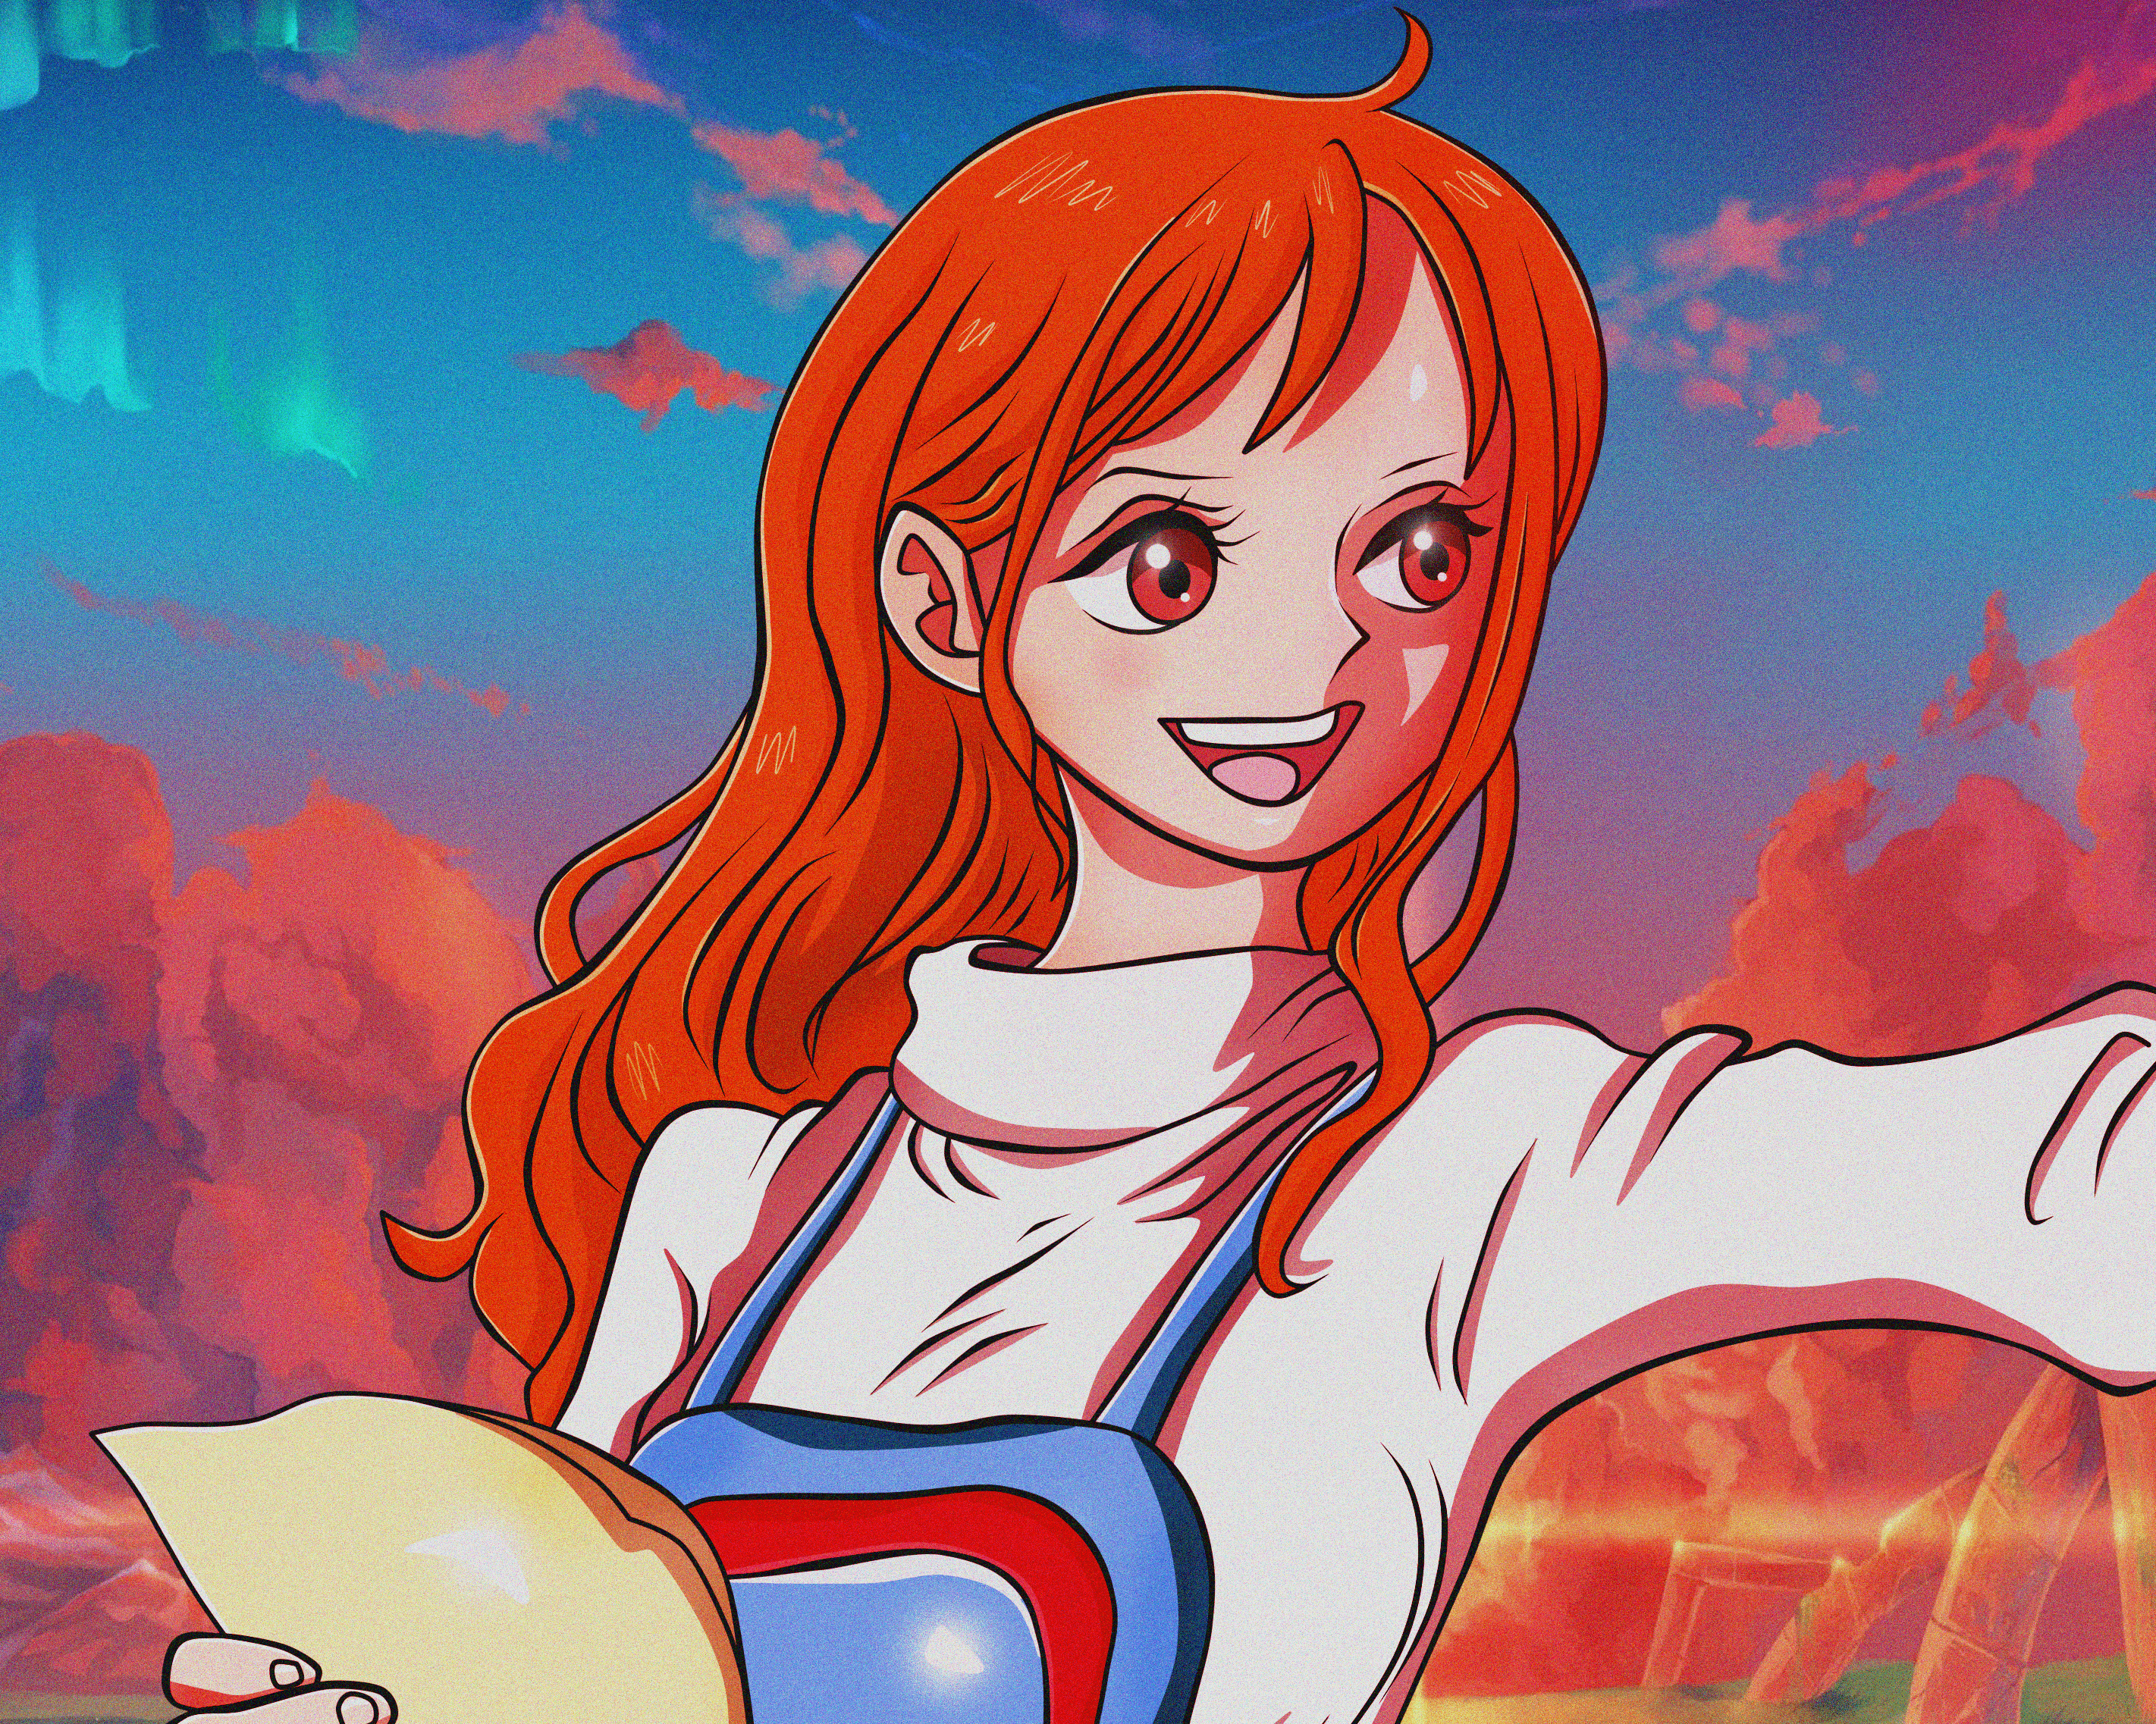 One Piece, Nami, character, anime, art, red hair, smile, clouds, sky, map - One Piece